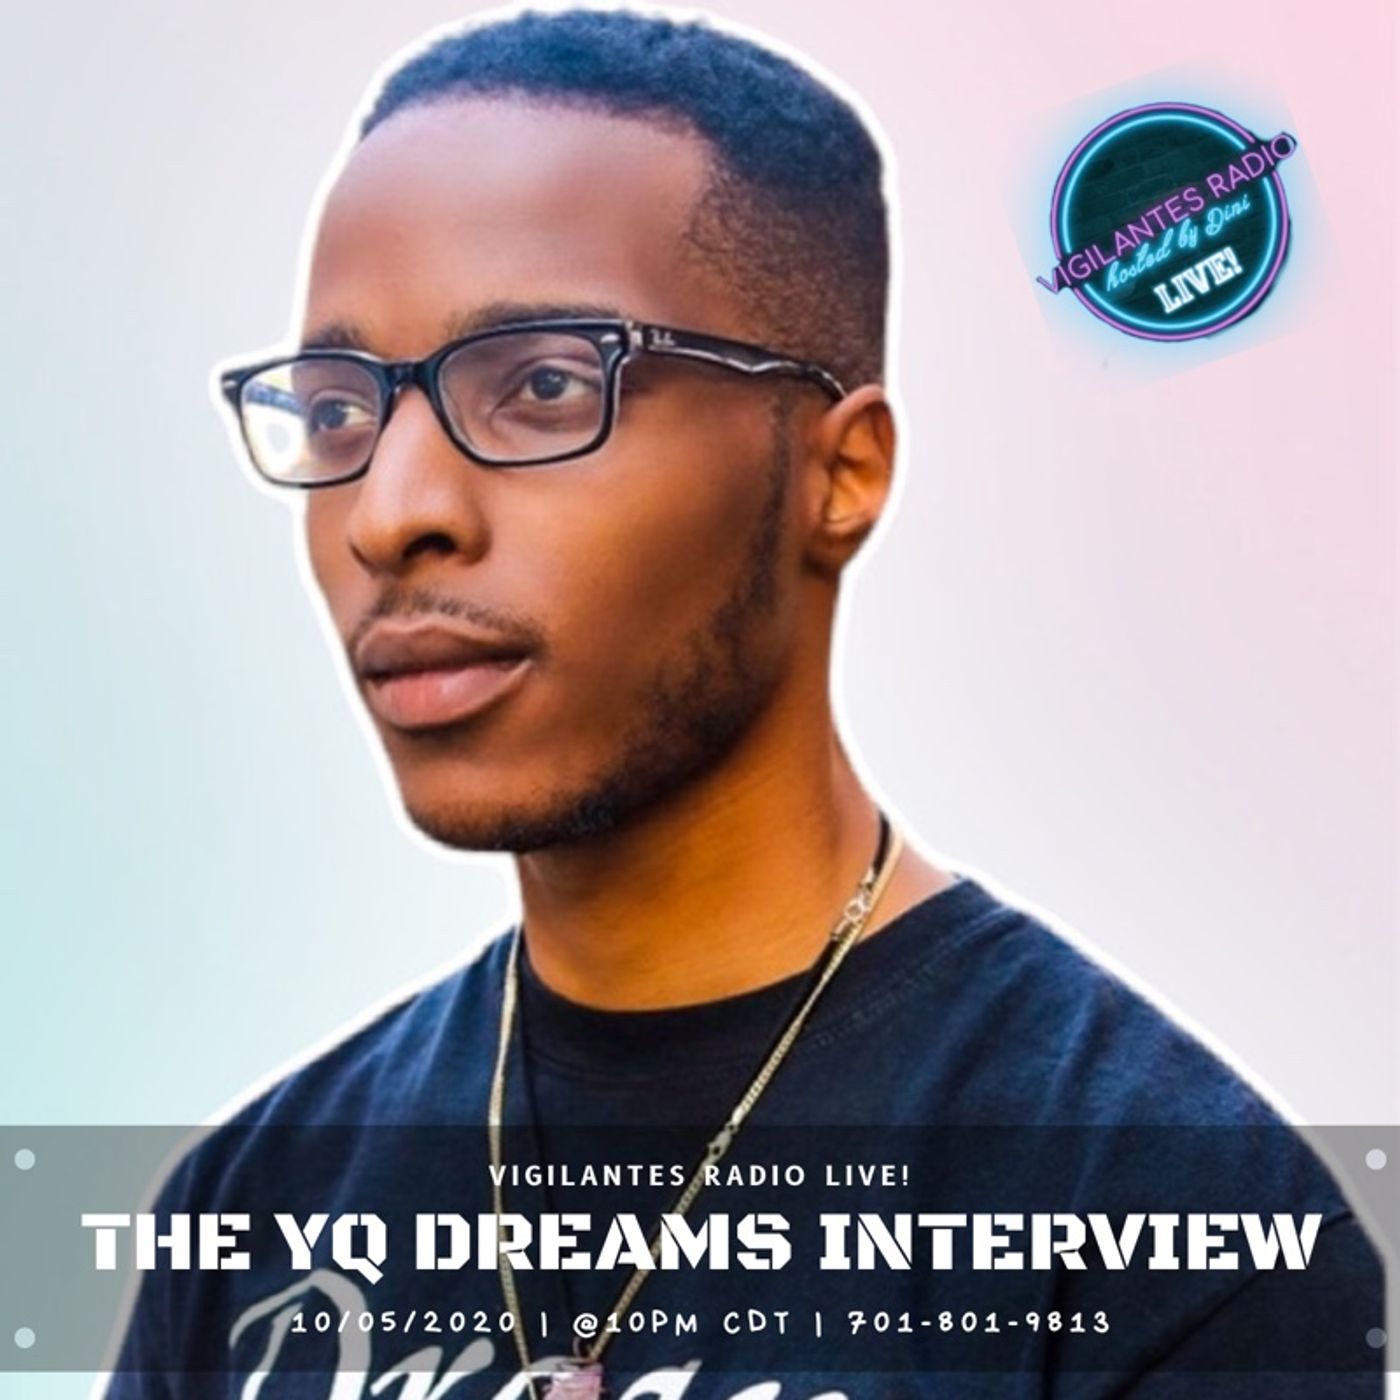 The YQ Dreams Interview. Image